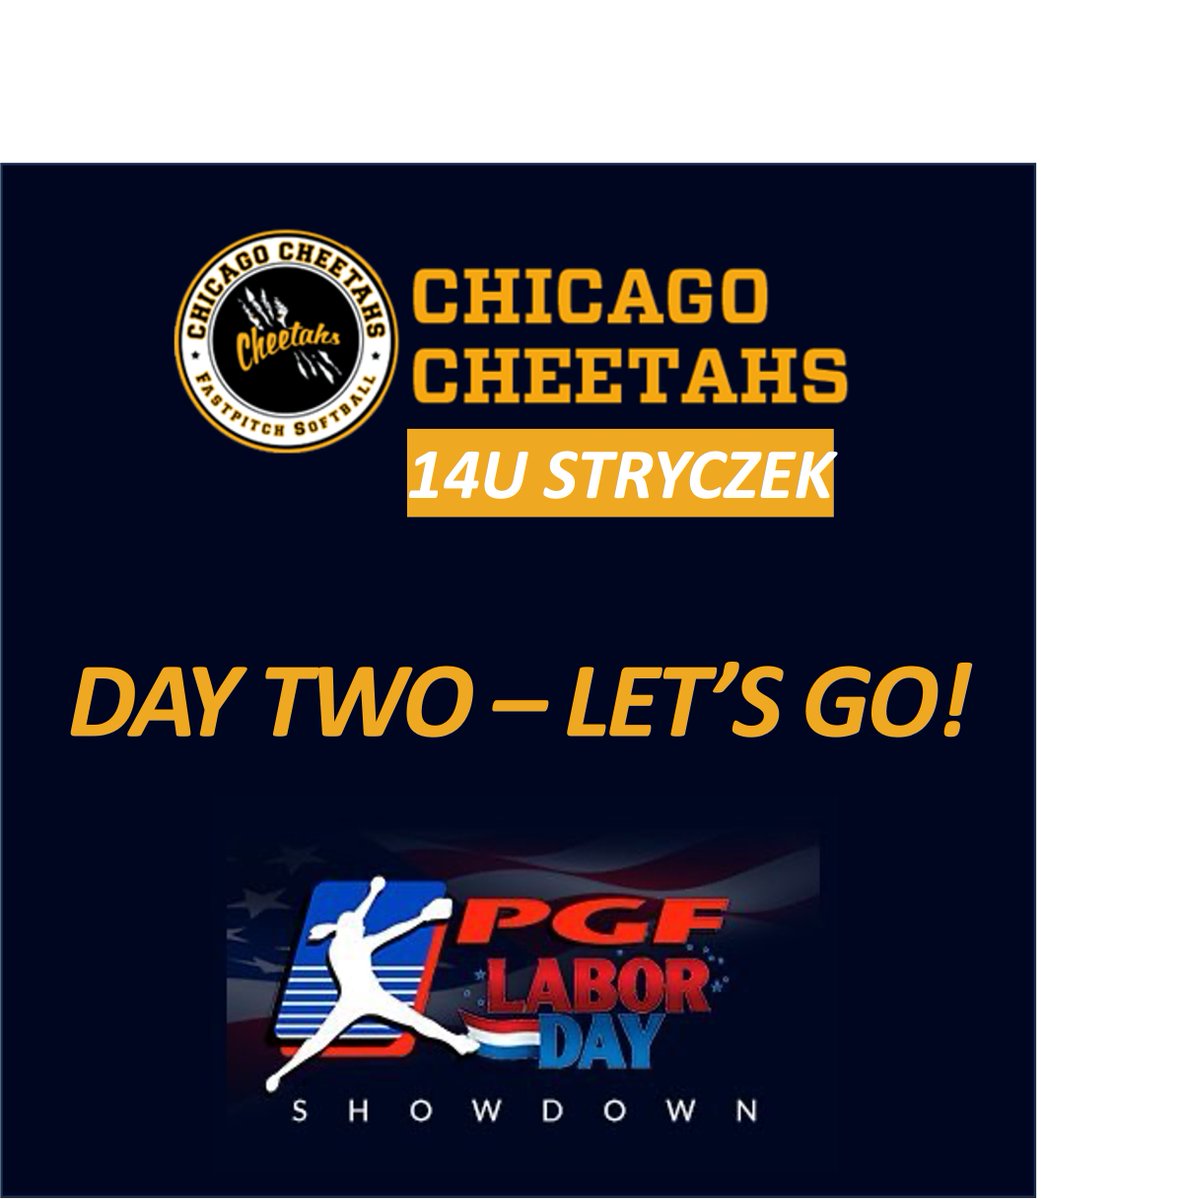 Day two at the @PGF_Showdown. LET'S GO Cheetahs! Stop by and see this team in action! #weplayfast @ChicagoCheetahs